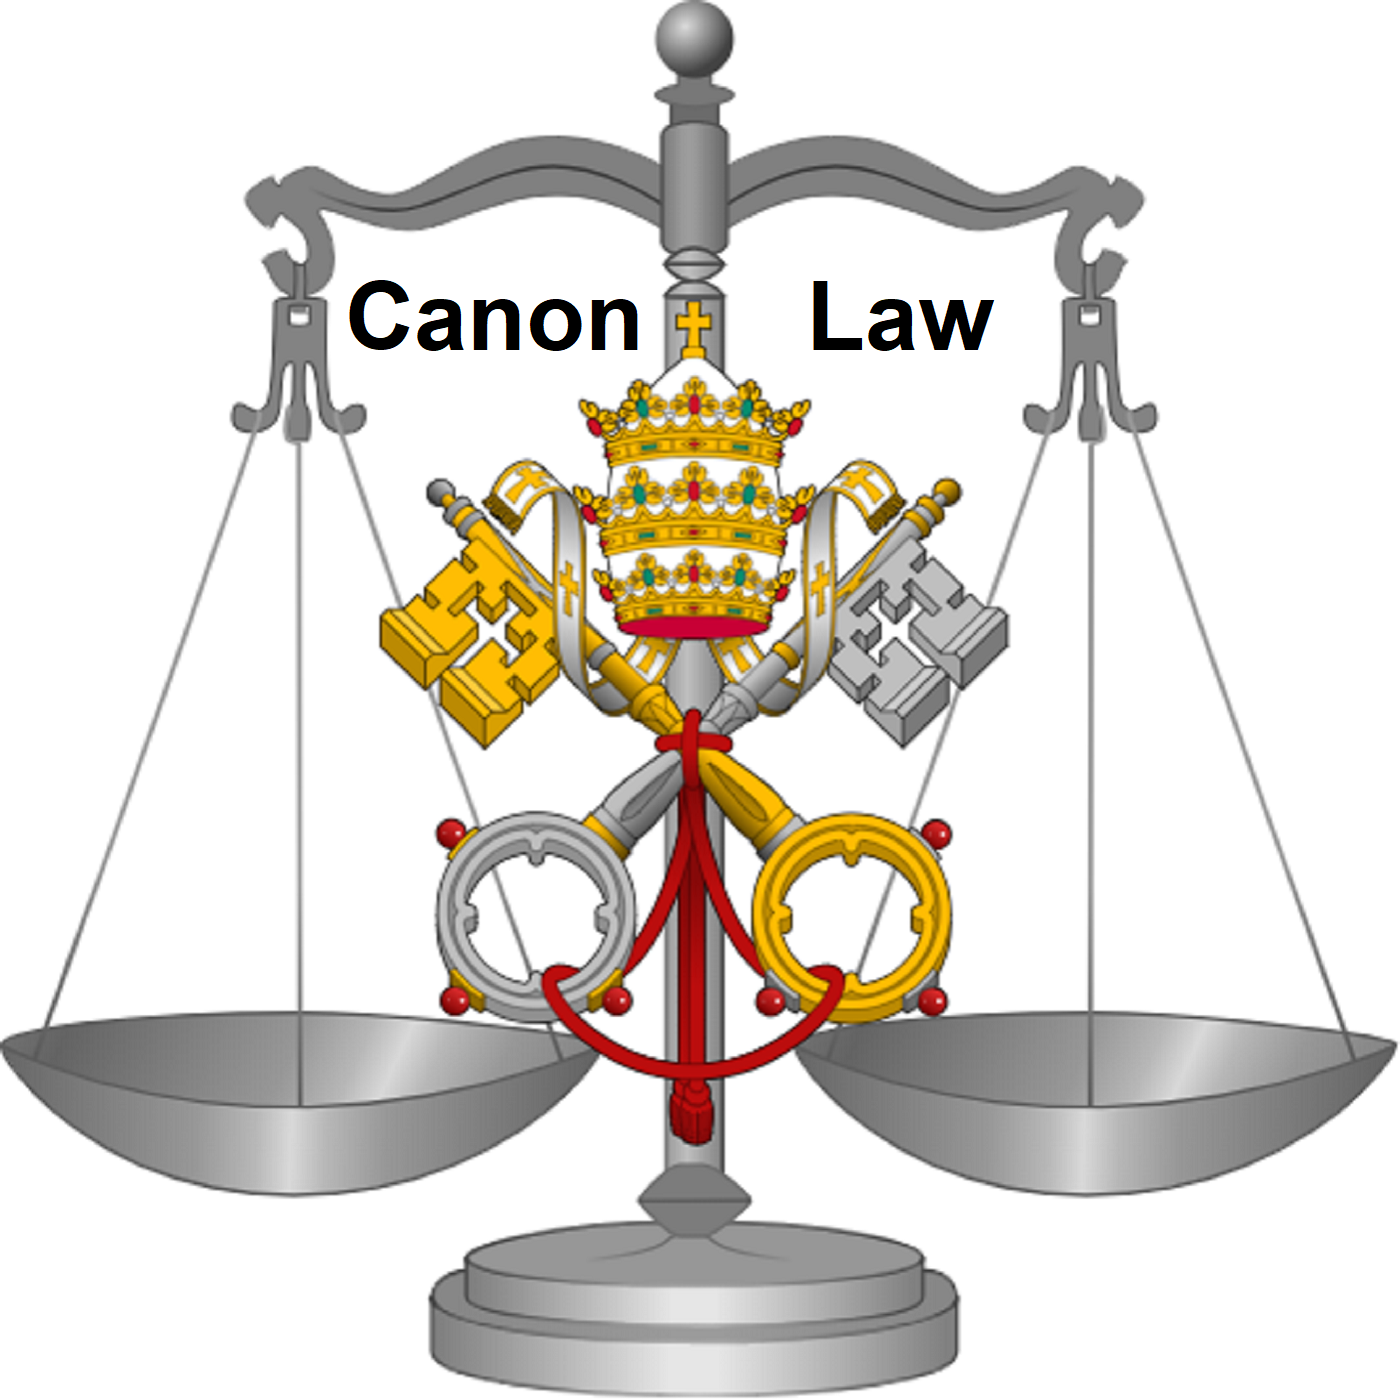 Canon Law modernised